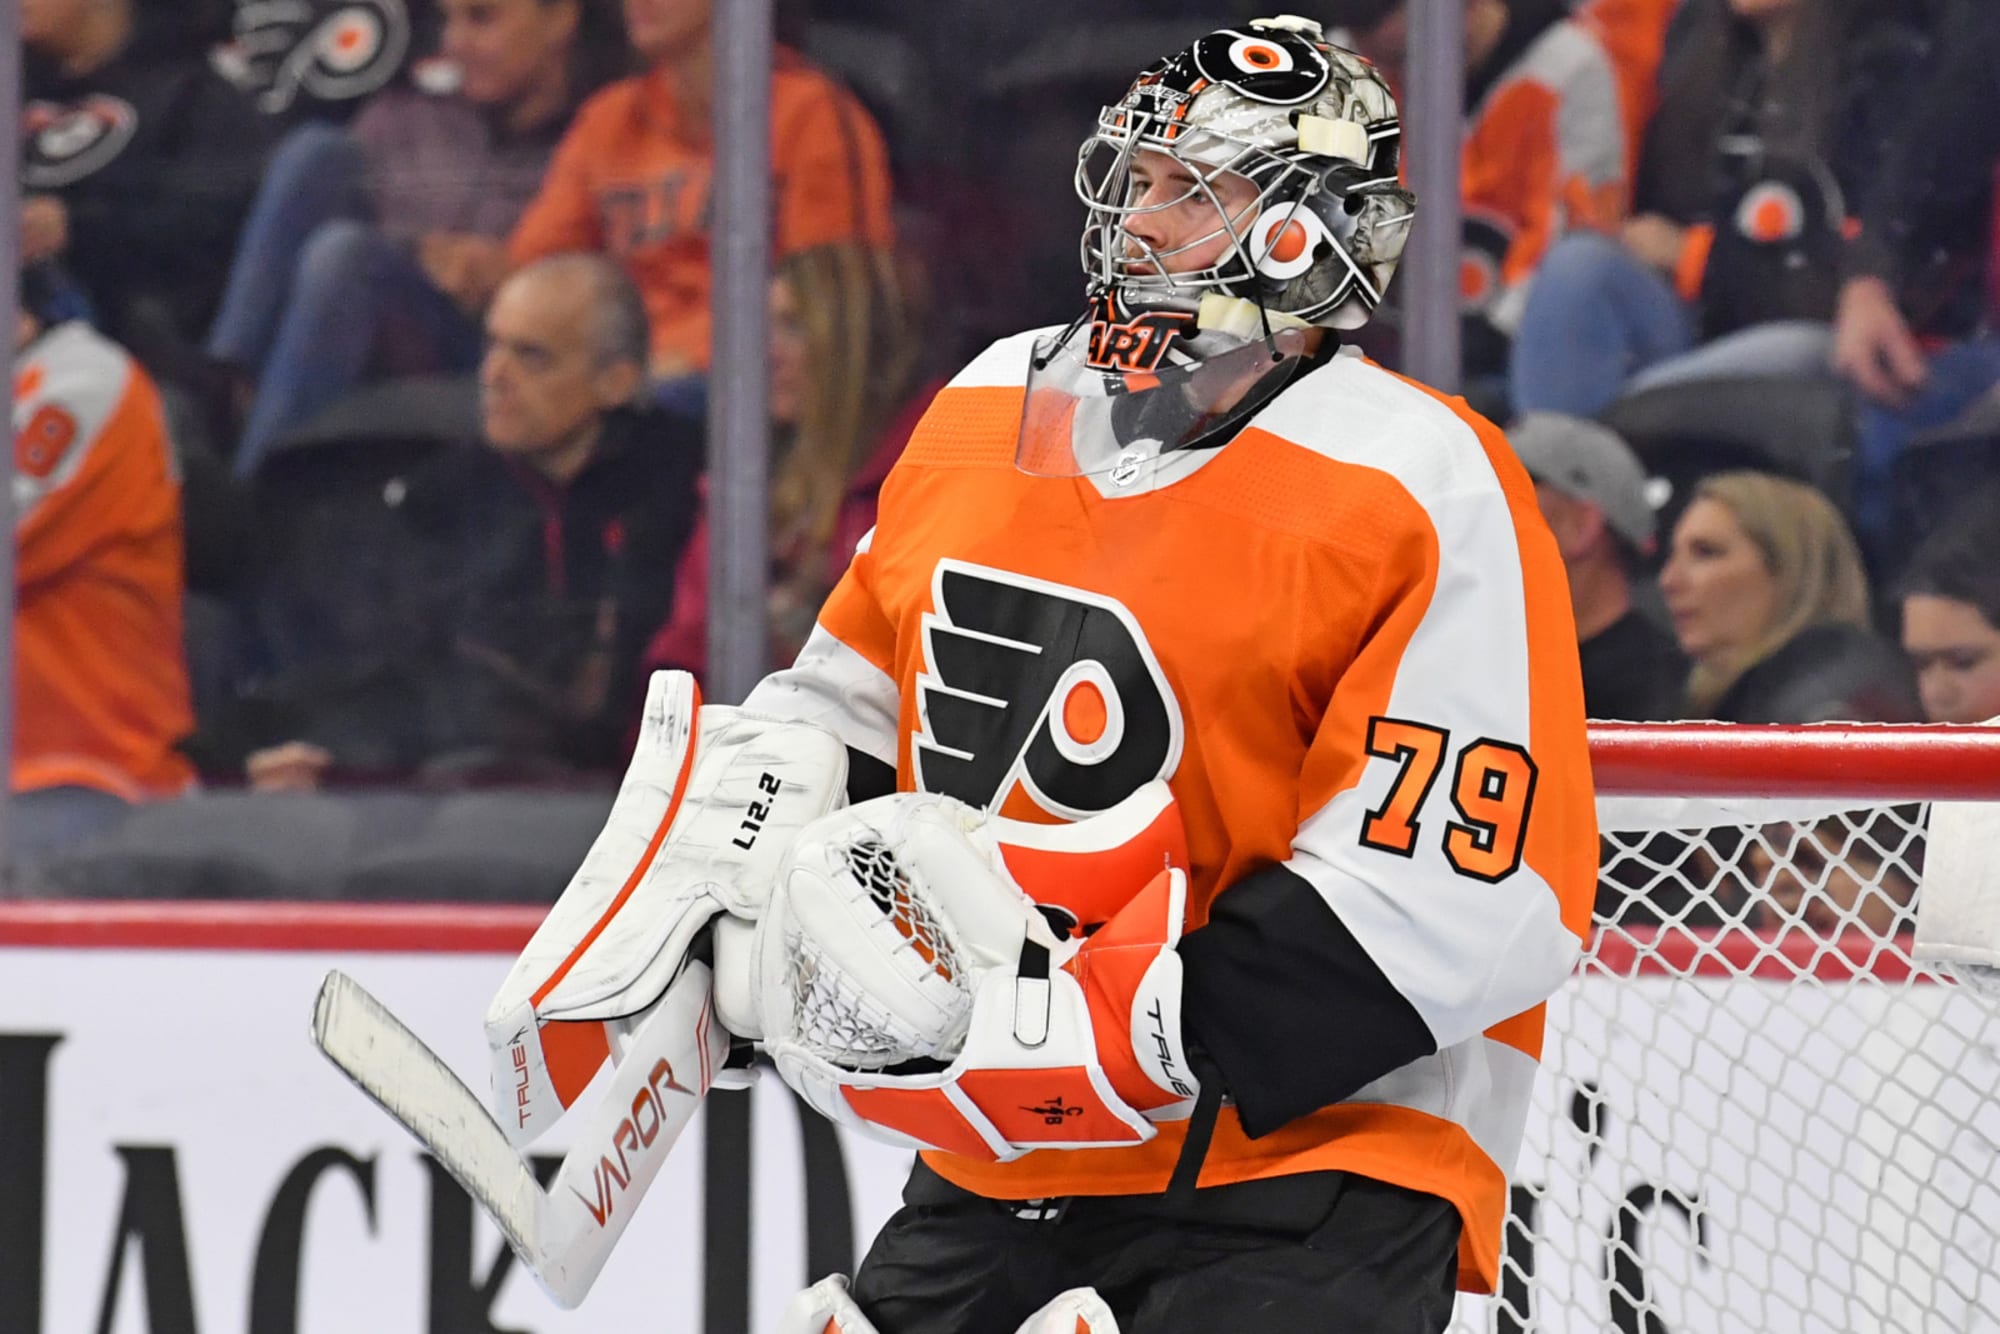 Carter Hart made the jump and his teammates want him to stay in NHL